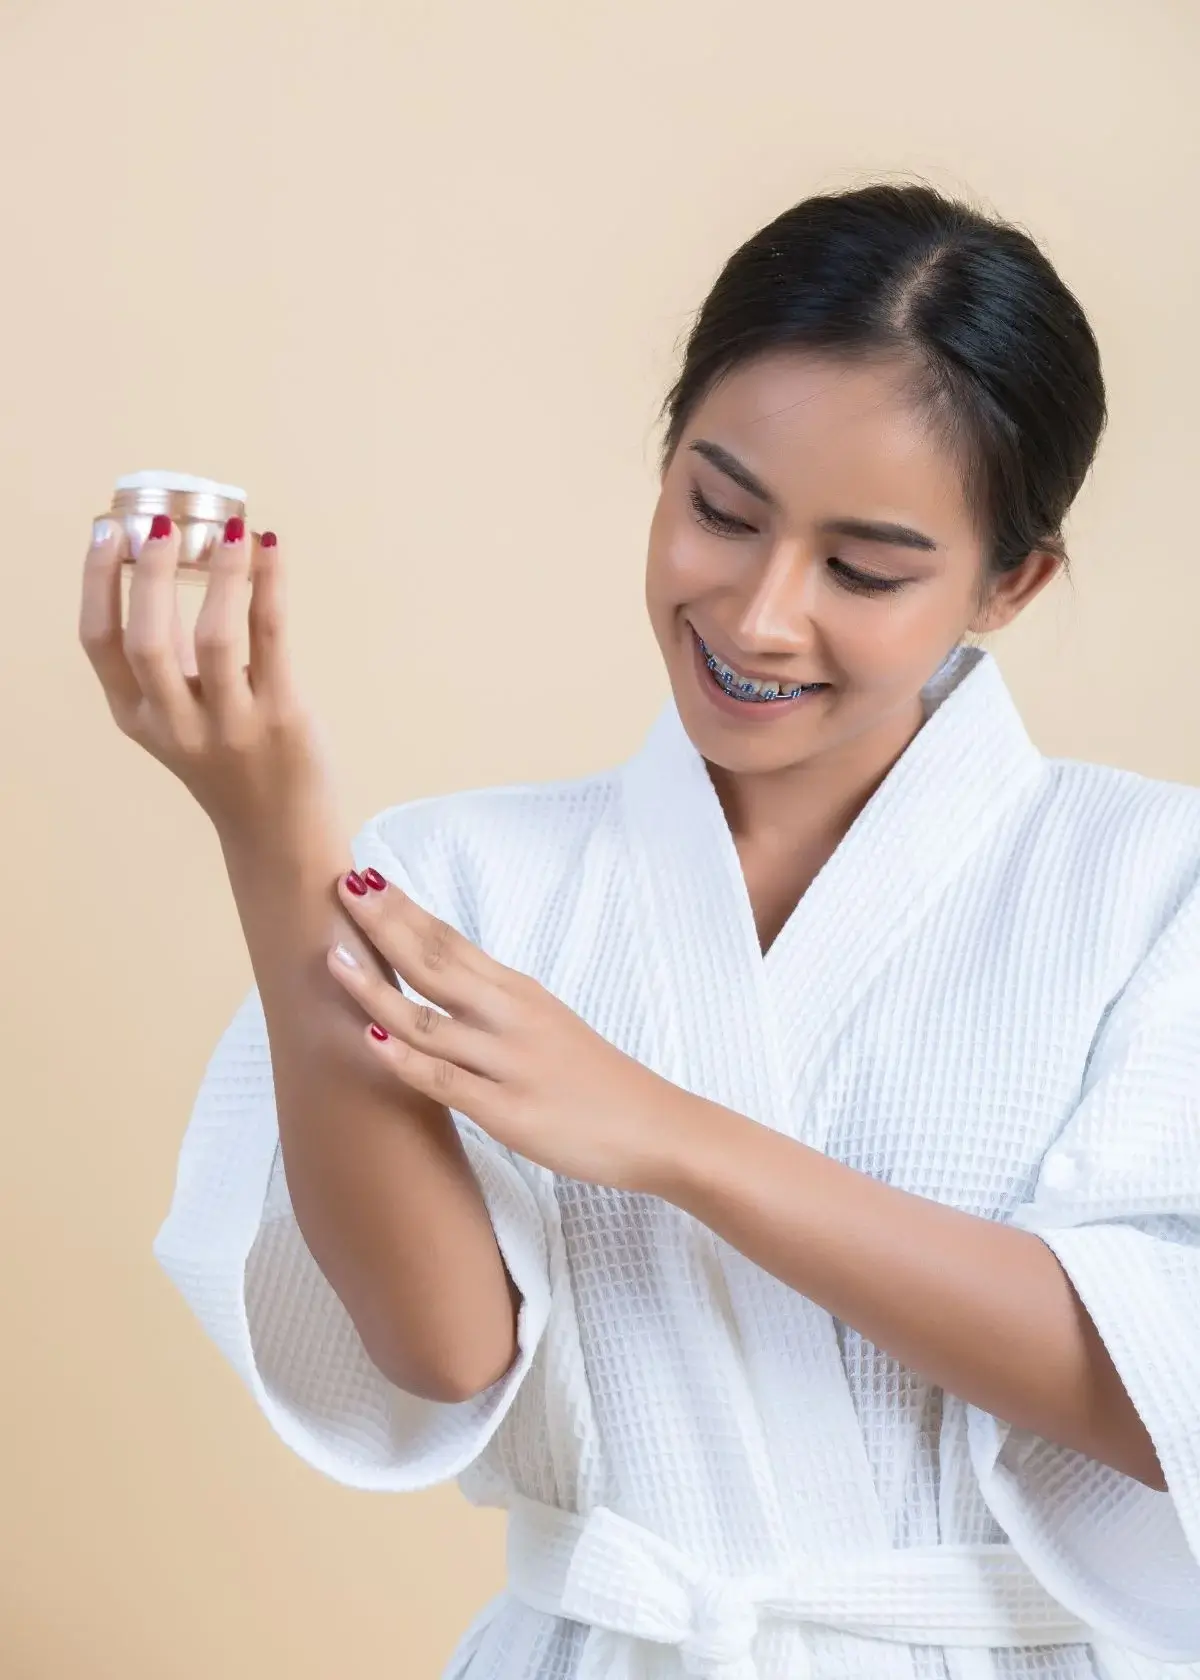 How does an anti-aging hand cream differ from a regular hand cream?